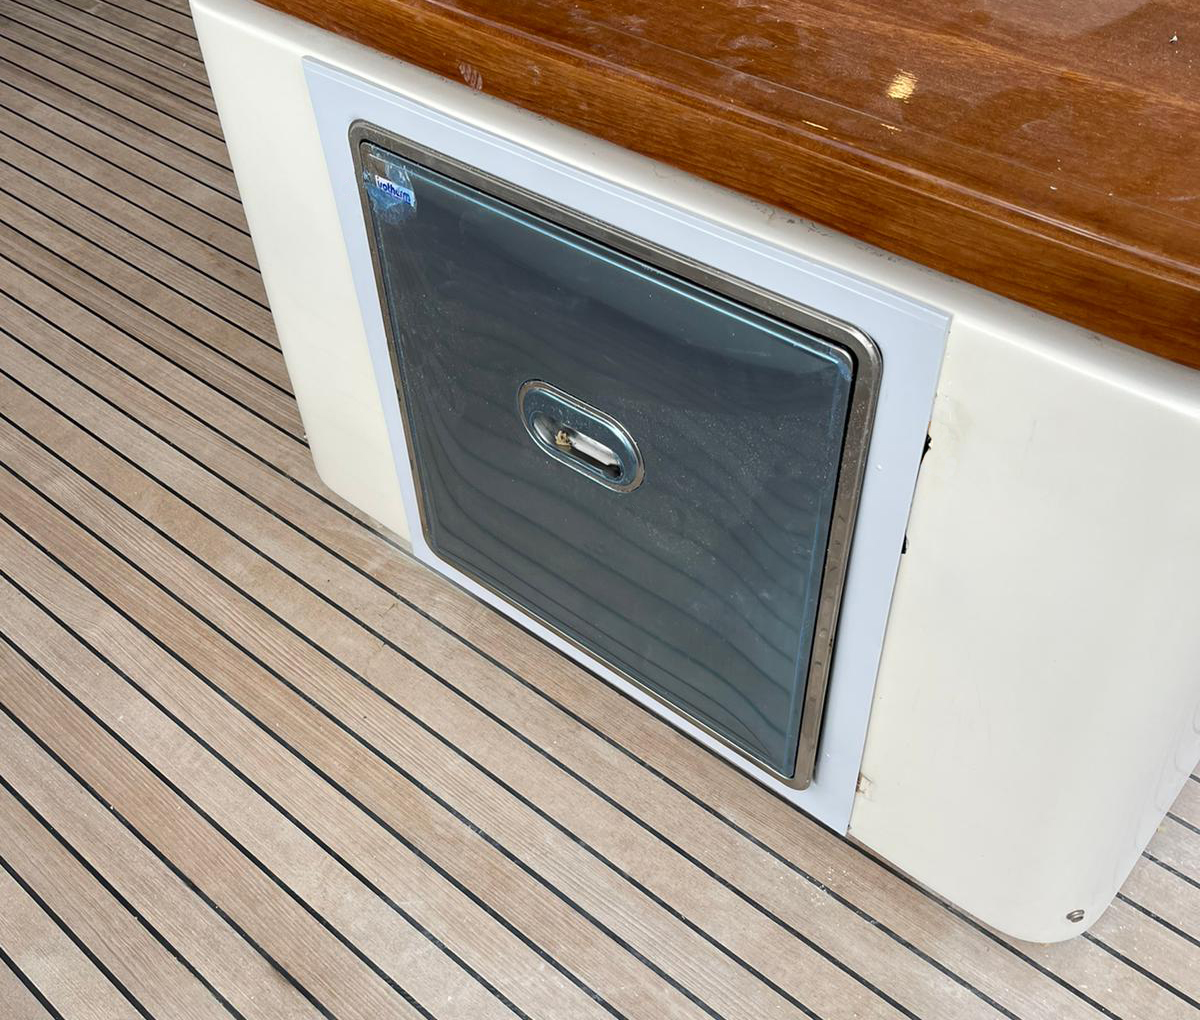 Refrigerator for boats